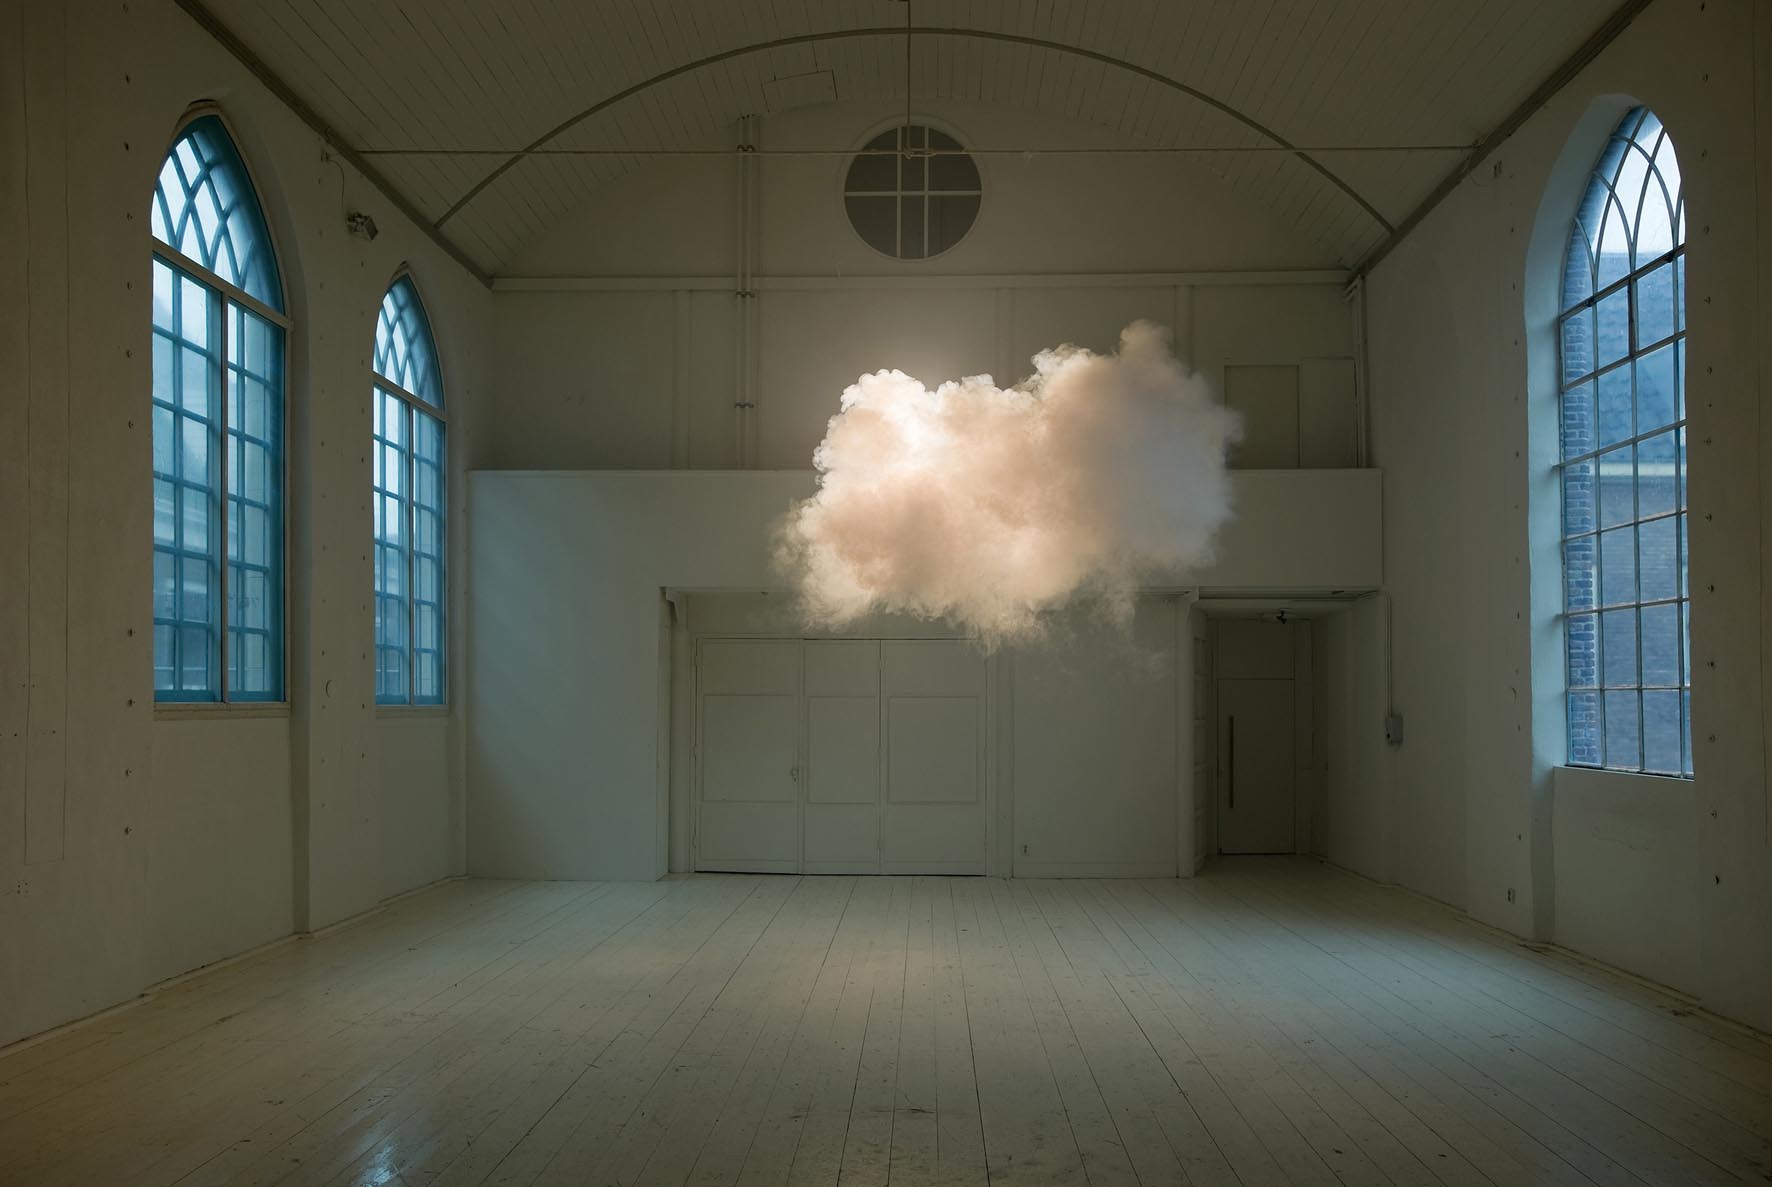 Berndnaut Smilde’s Nimbus – What are his clouds all about?